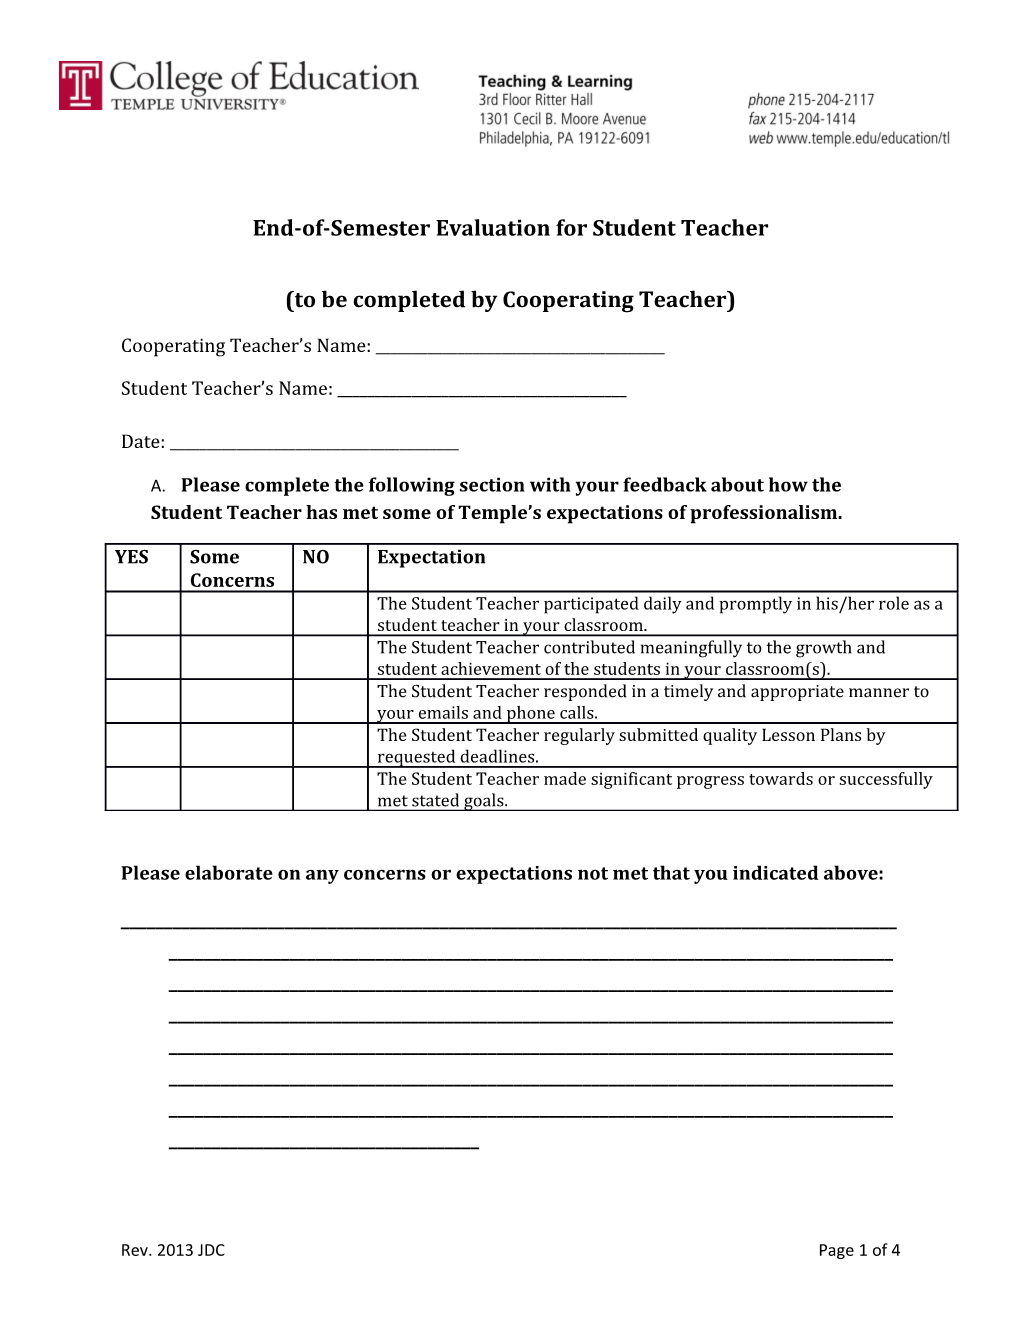 End-Of-Semester Evaluation for Student Teacher